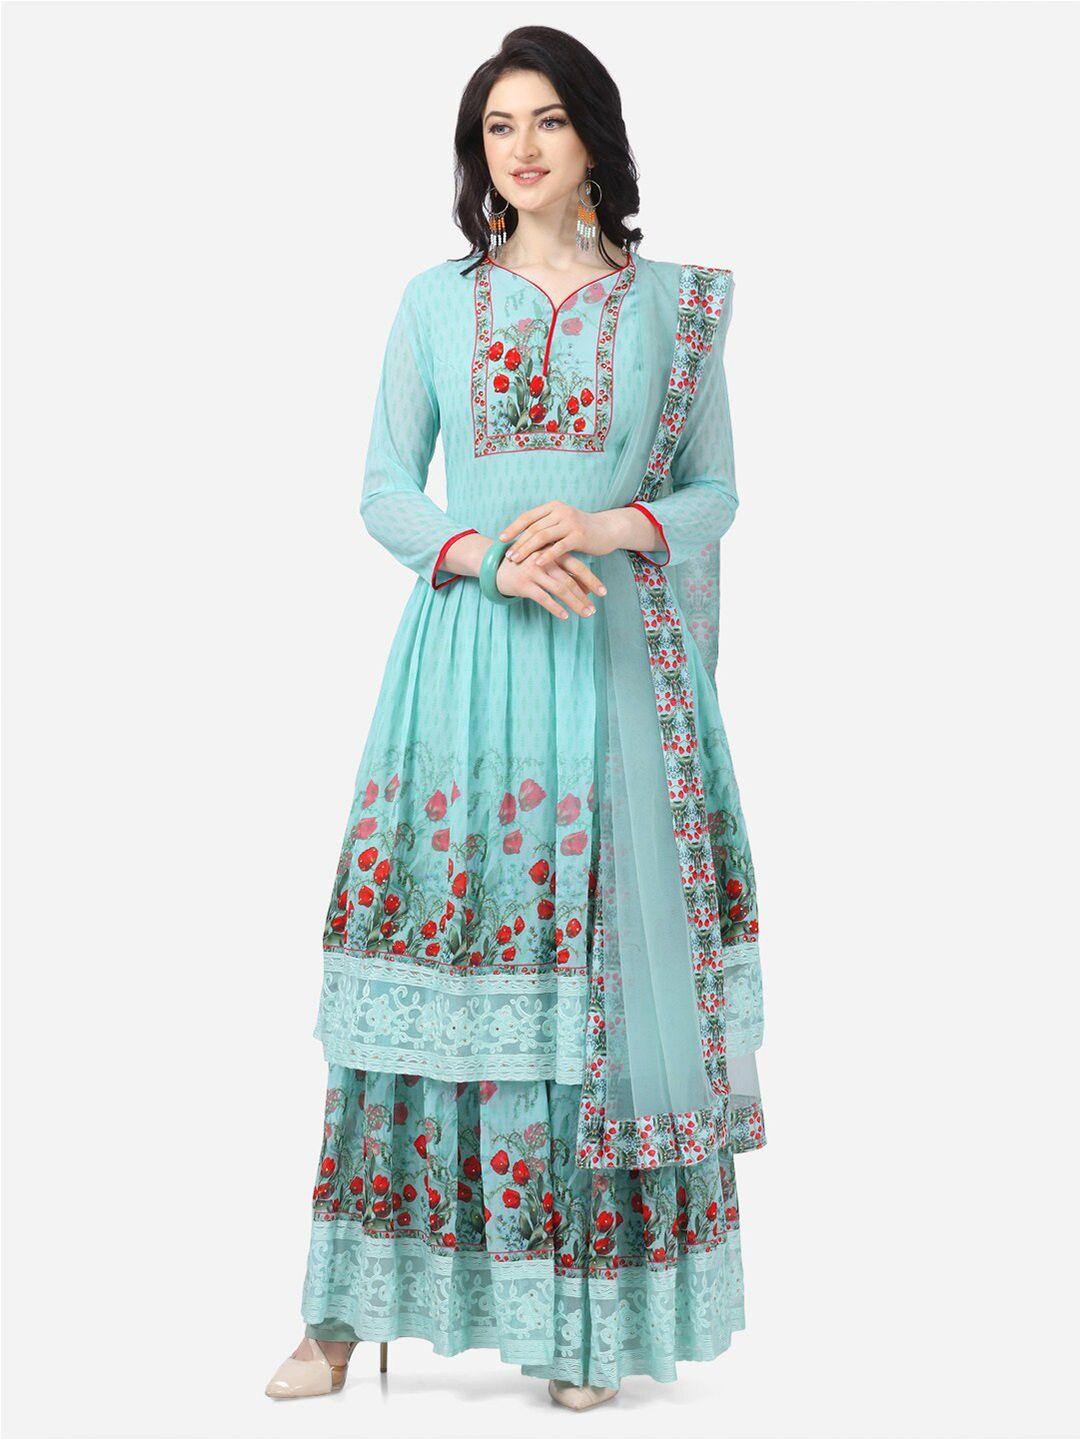 mf-floral-printed-georgette-semi-stitched-dress-material